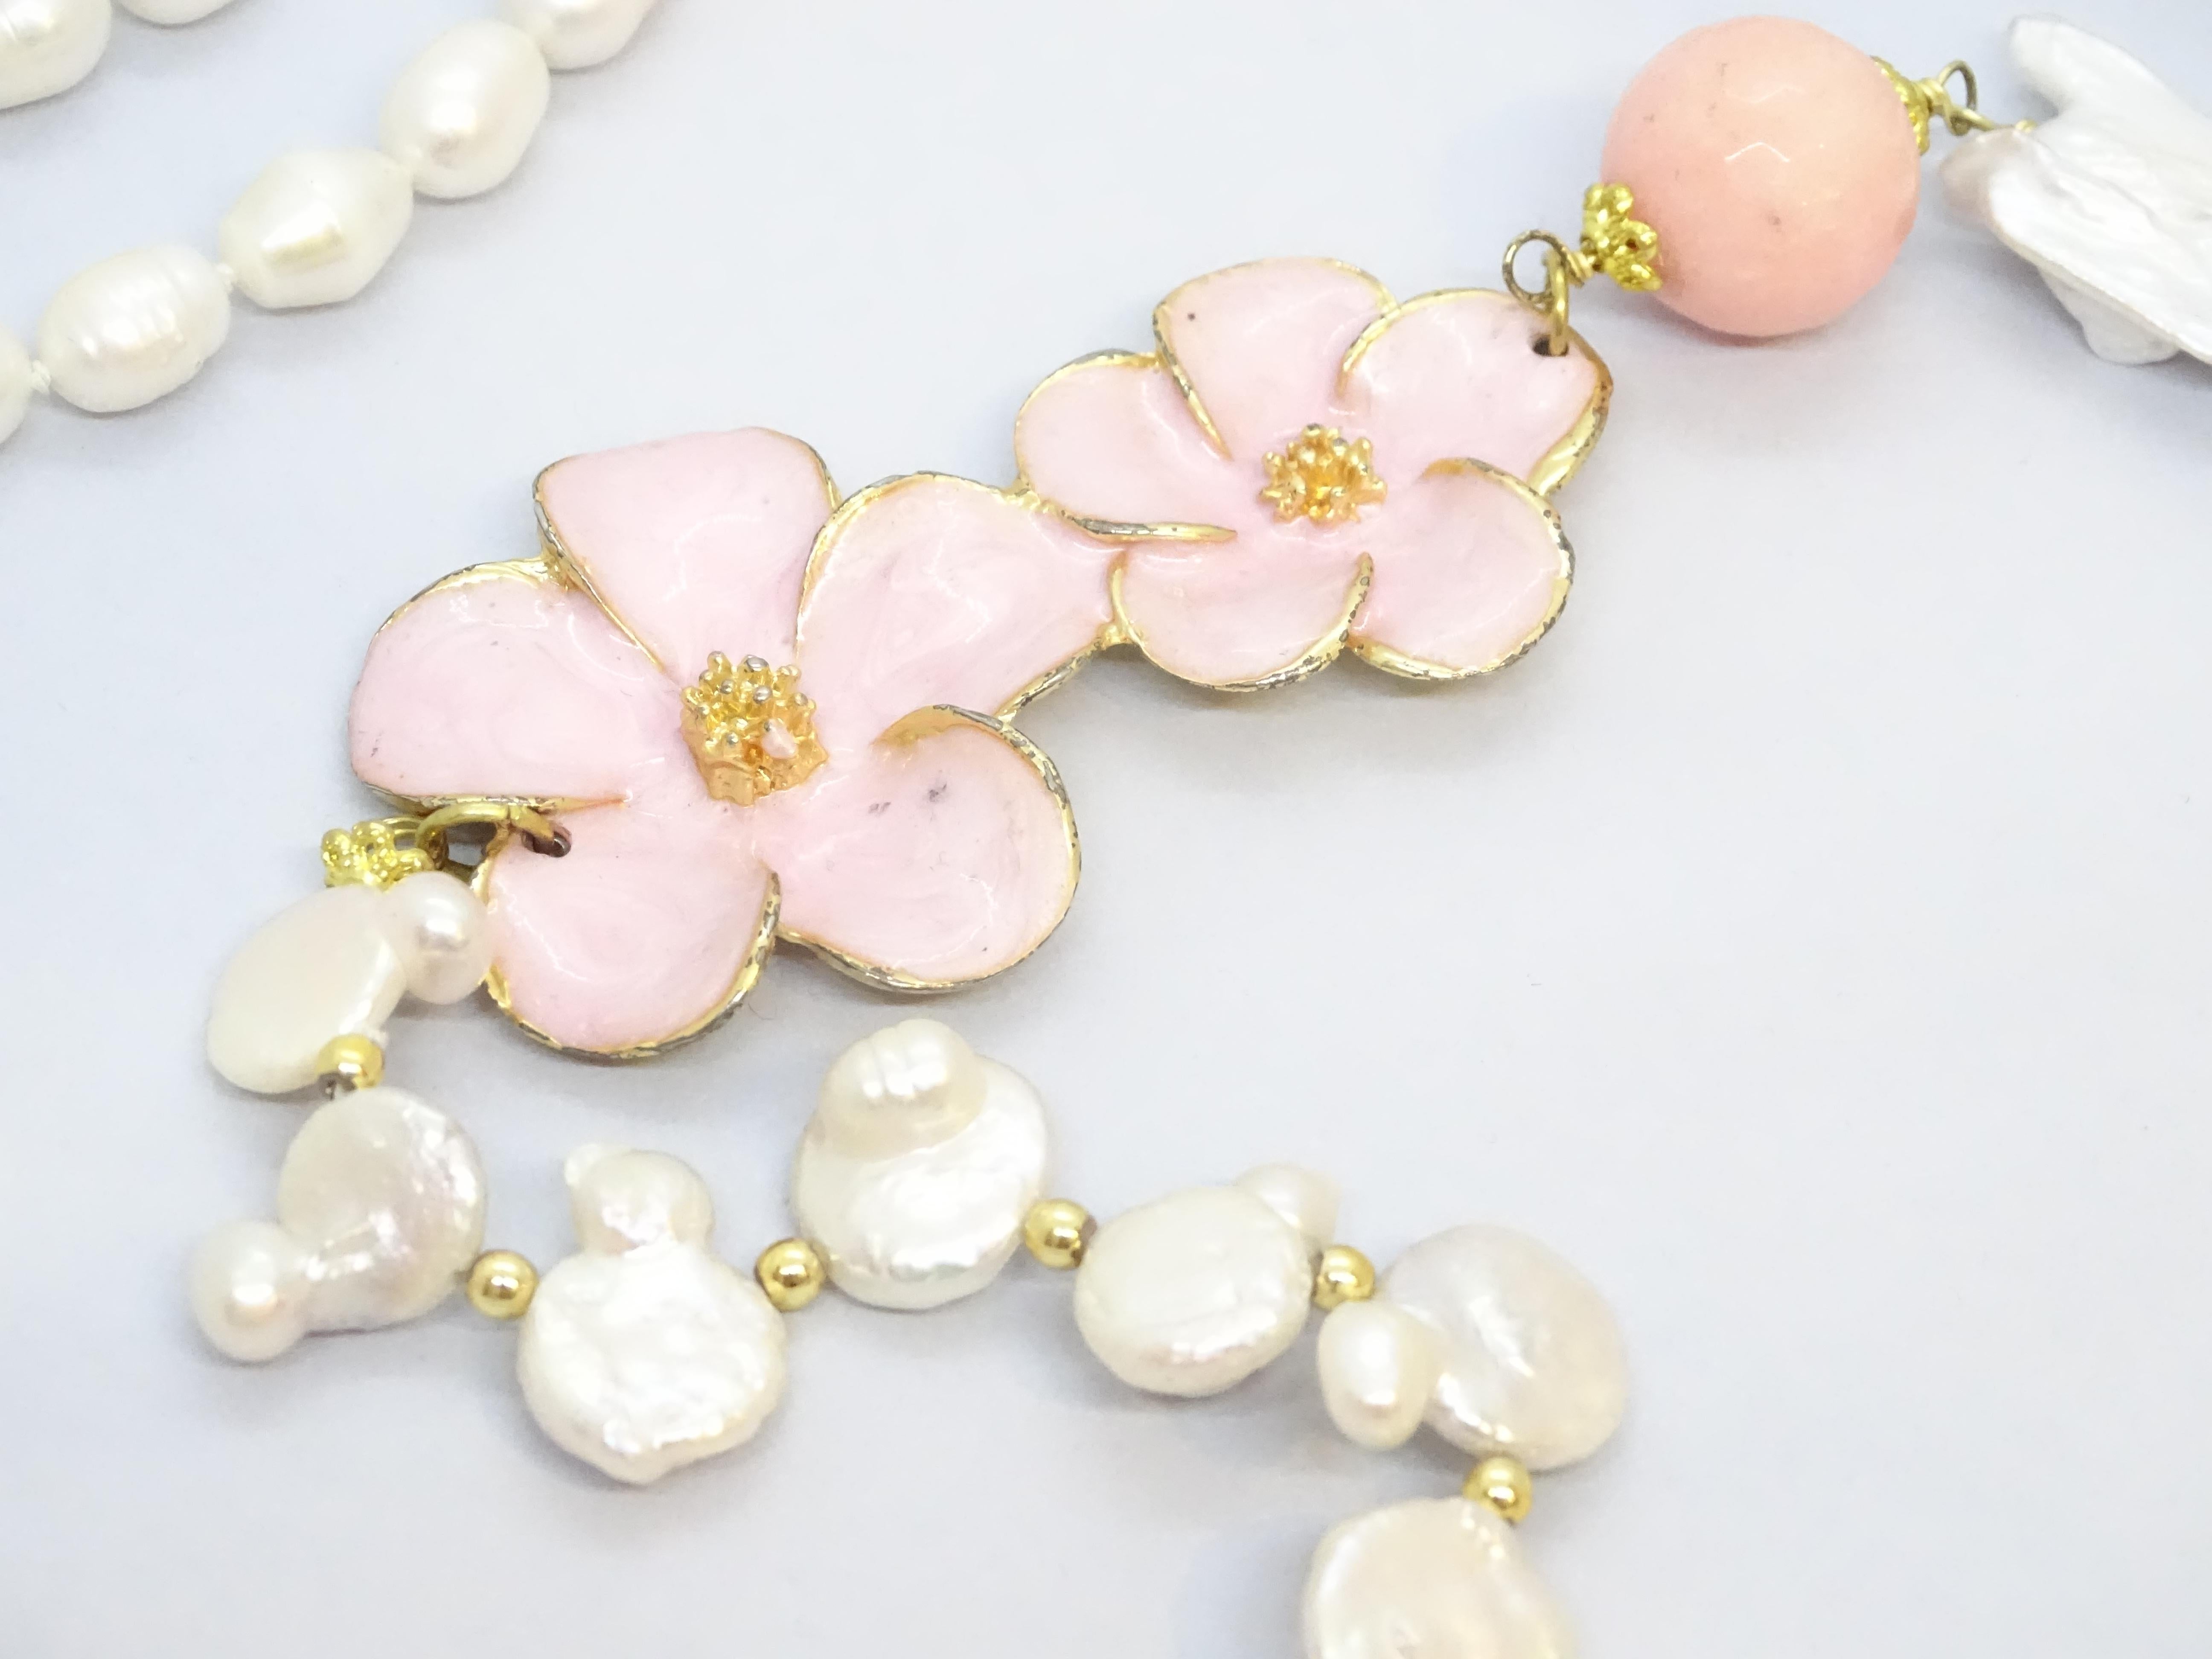 Italian necklace with baroque pearls, rose quartz and enamel For Sale 1